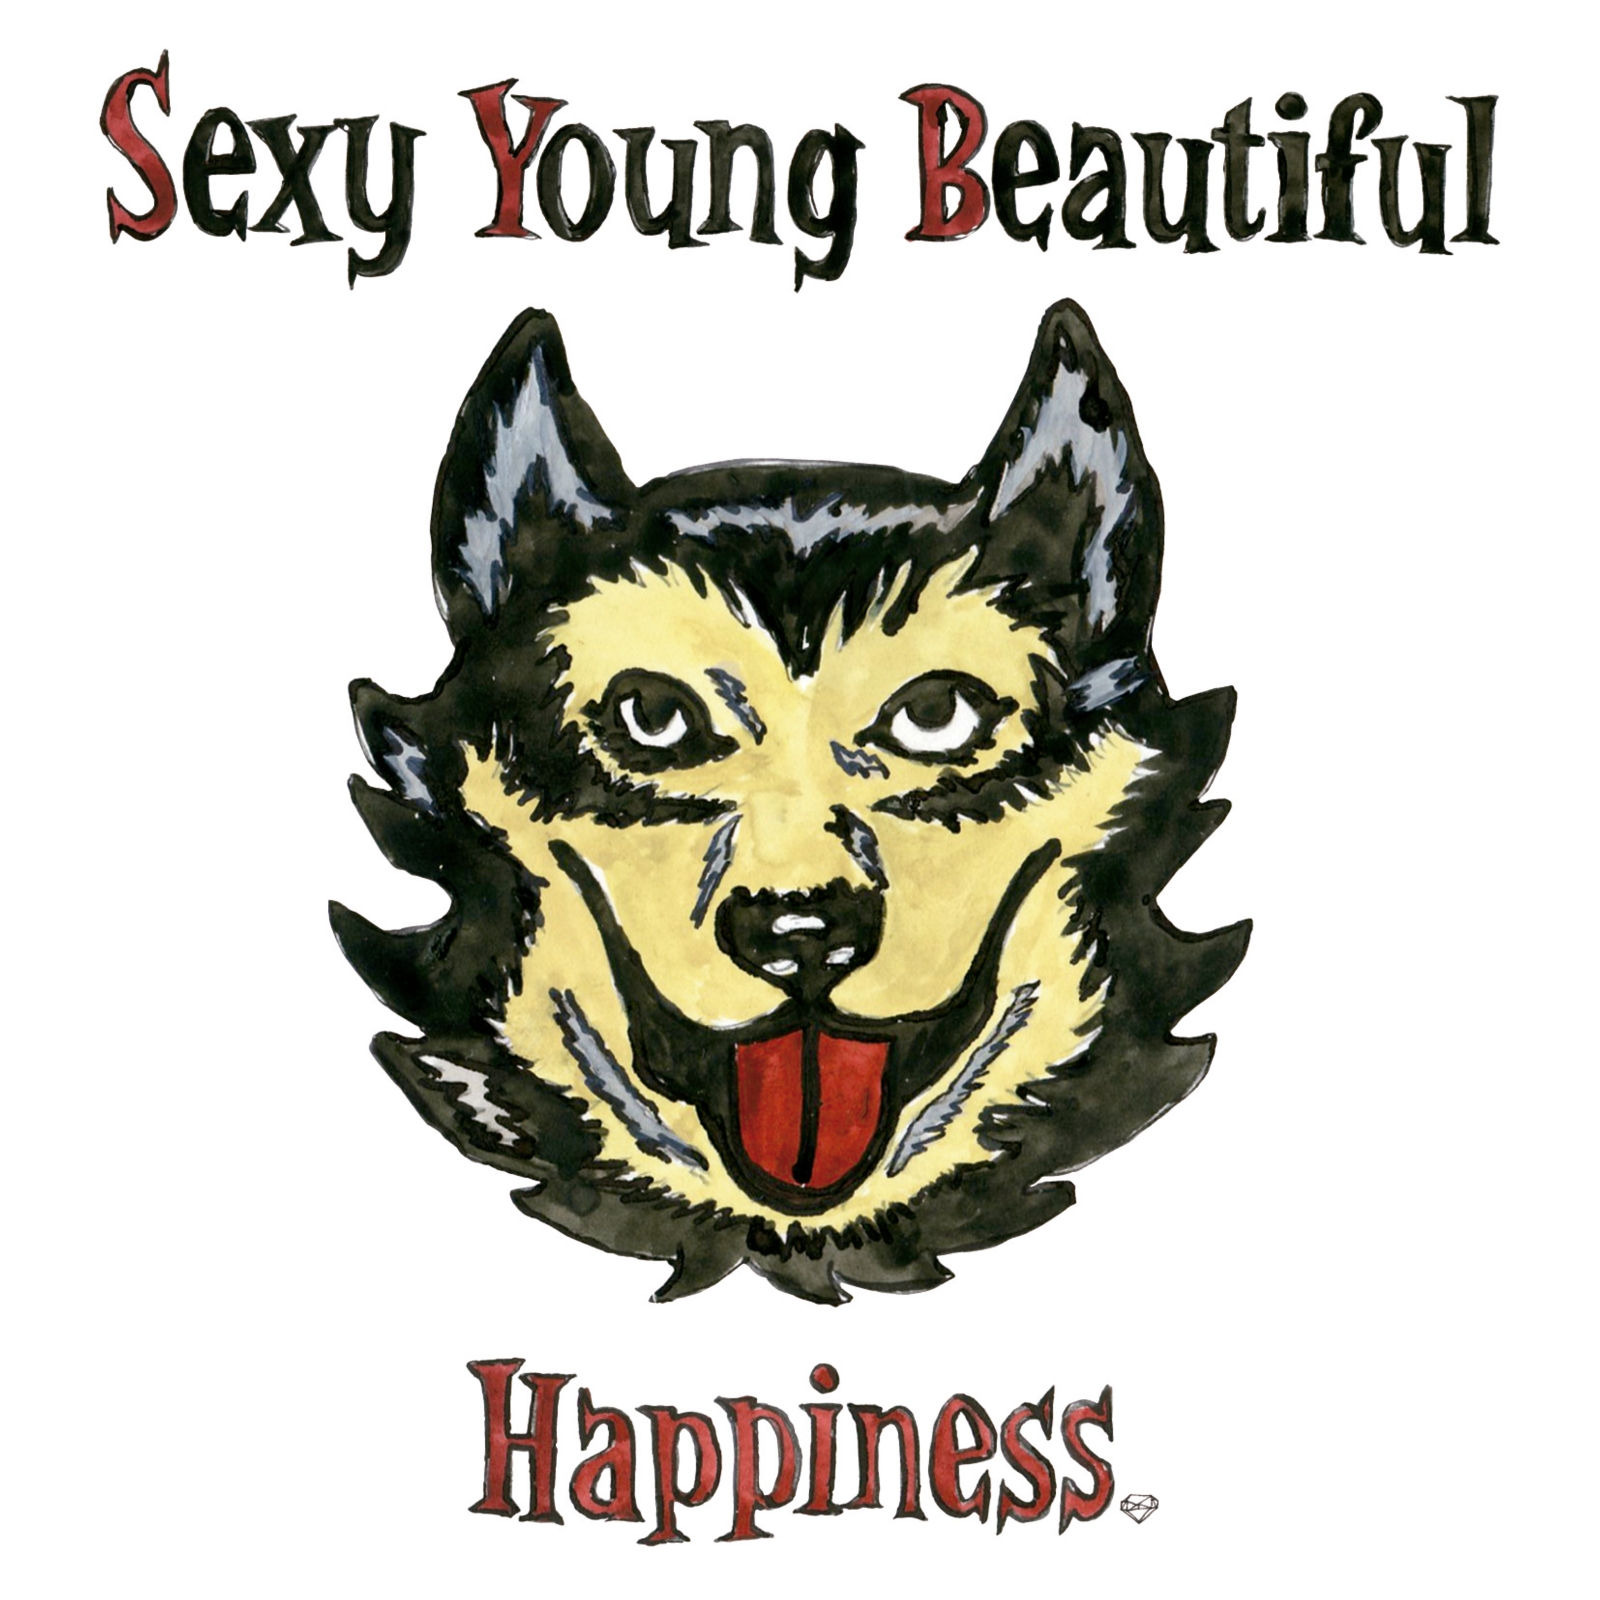 Happiness Sexy Young Beautiful cover artwork